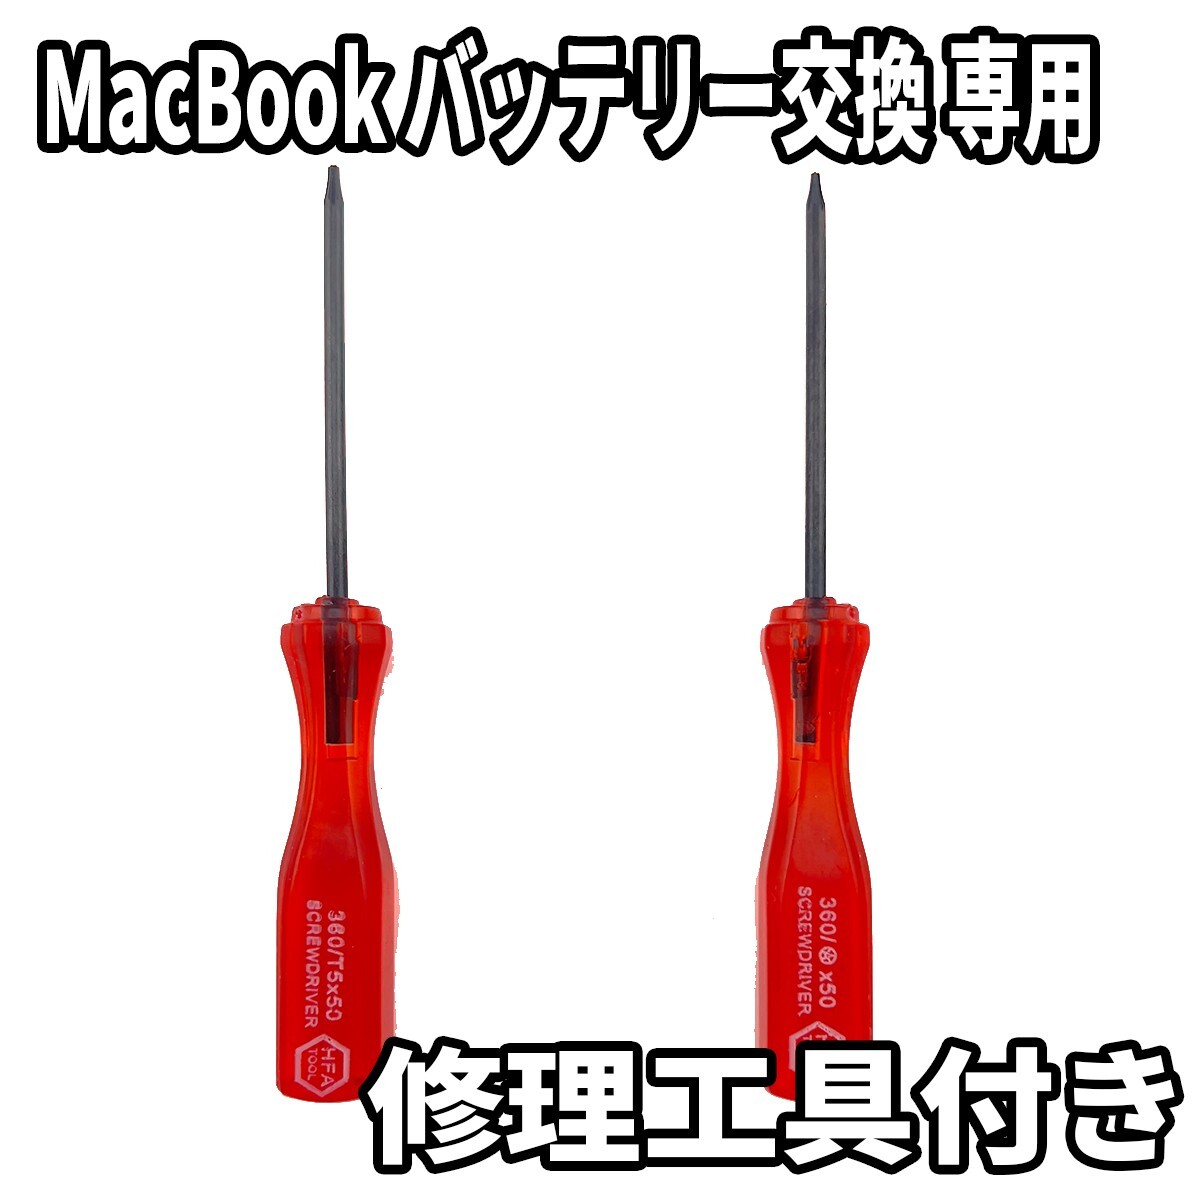  new goods MacBook Pro 16inch A2141 battery A2113 2019 battery body for exchange repair tool 